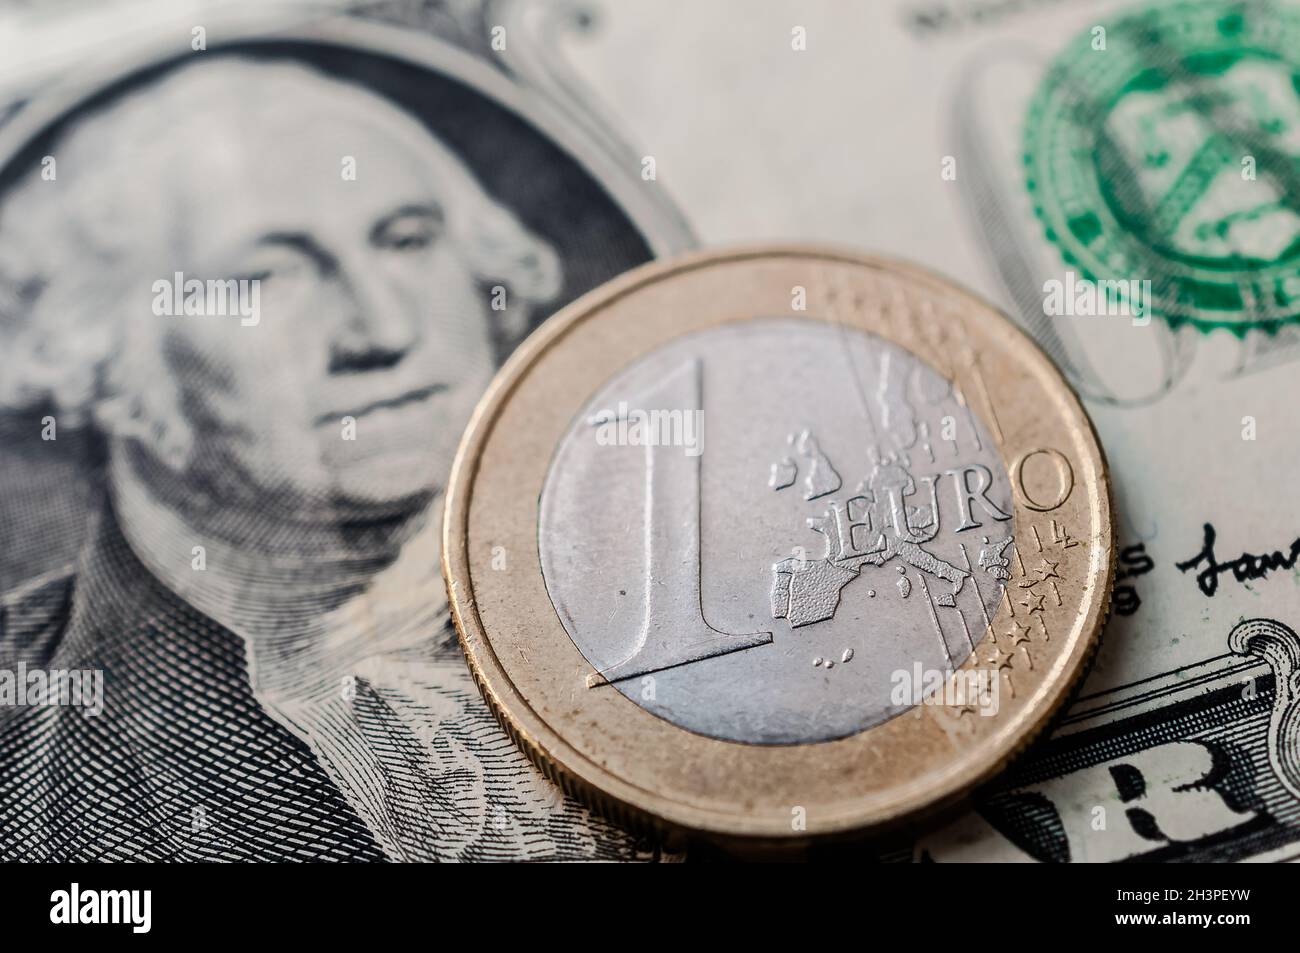 One US Dollar and 1 Euro coin Stock Photo